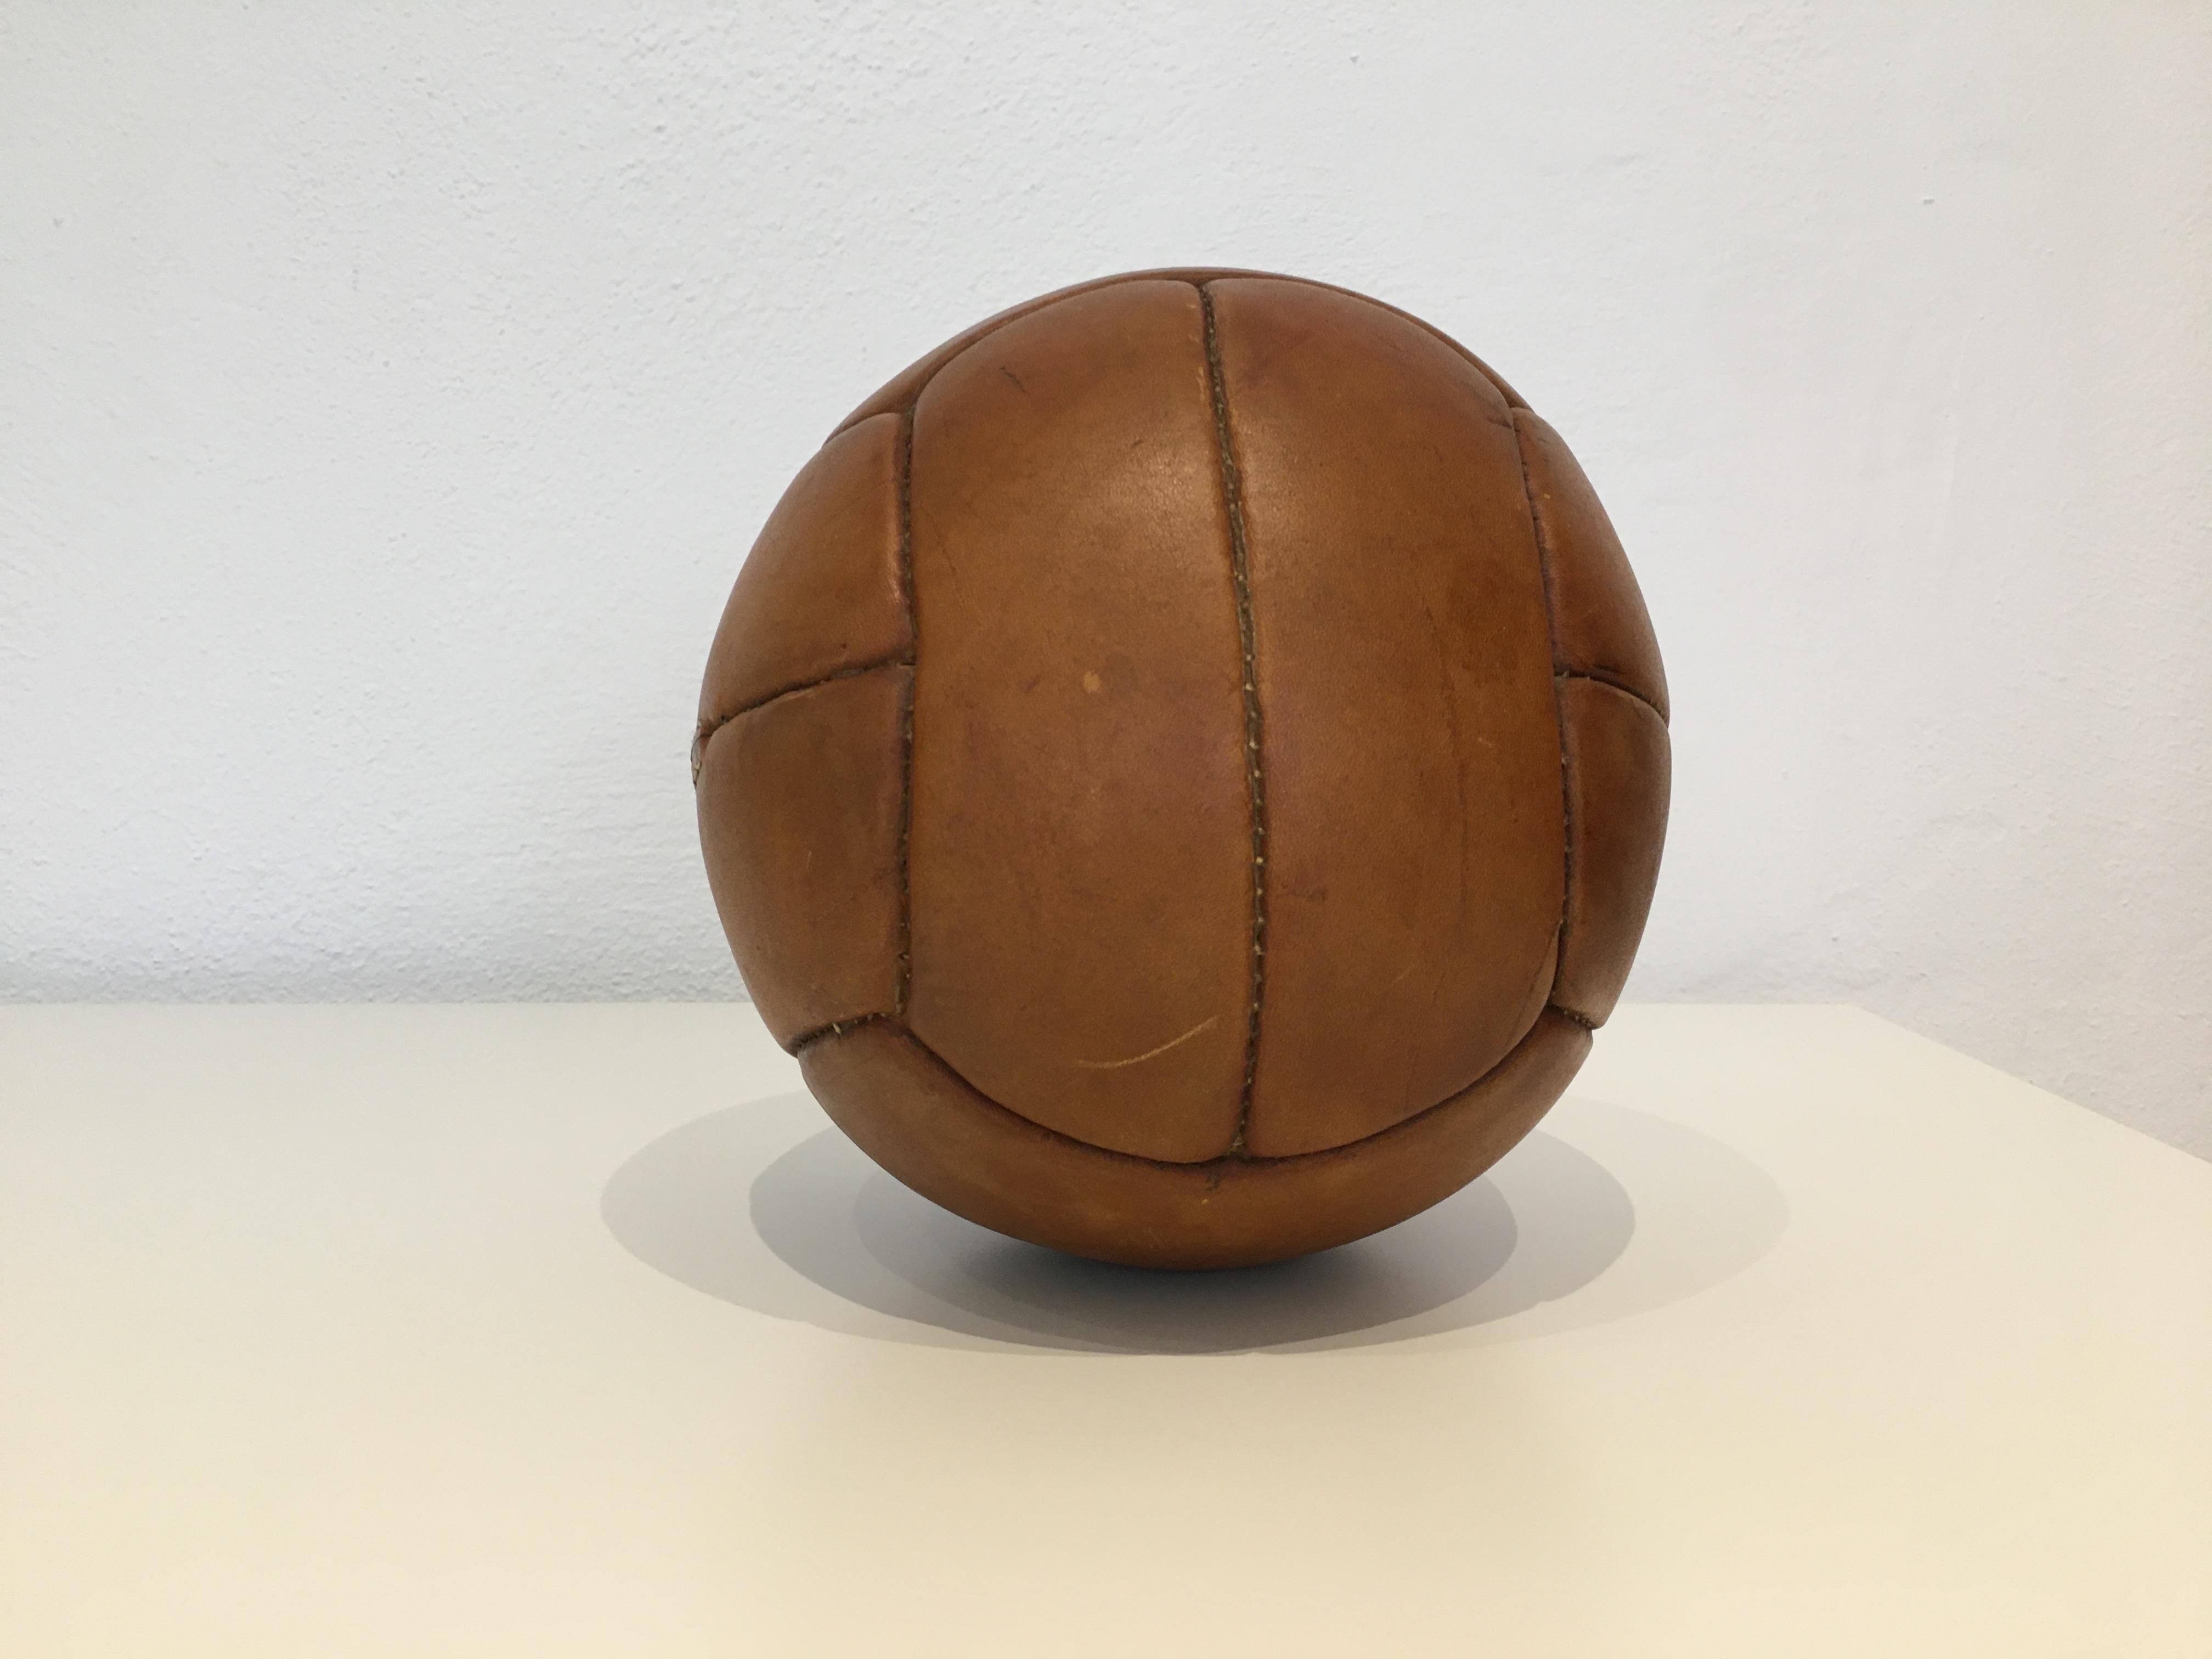 Vintage Brown Leather Medicine Ball, 1kg, 1930s In Good Condition For Sale In Wien, AT